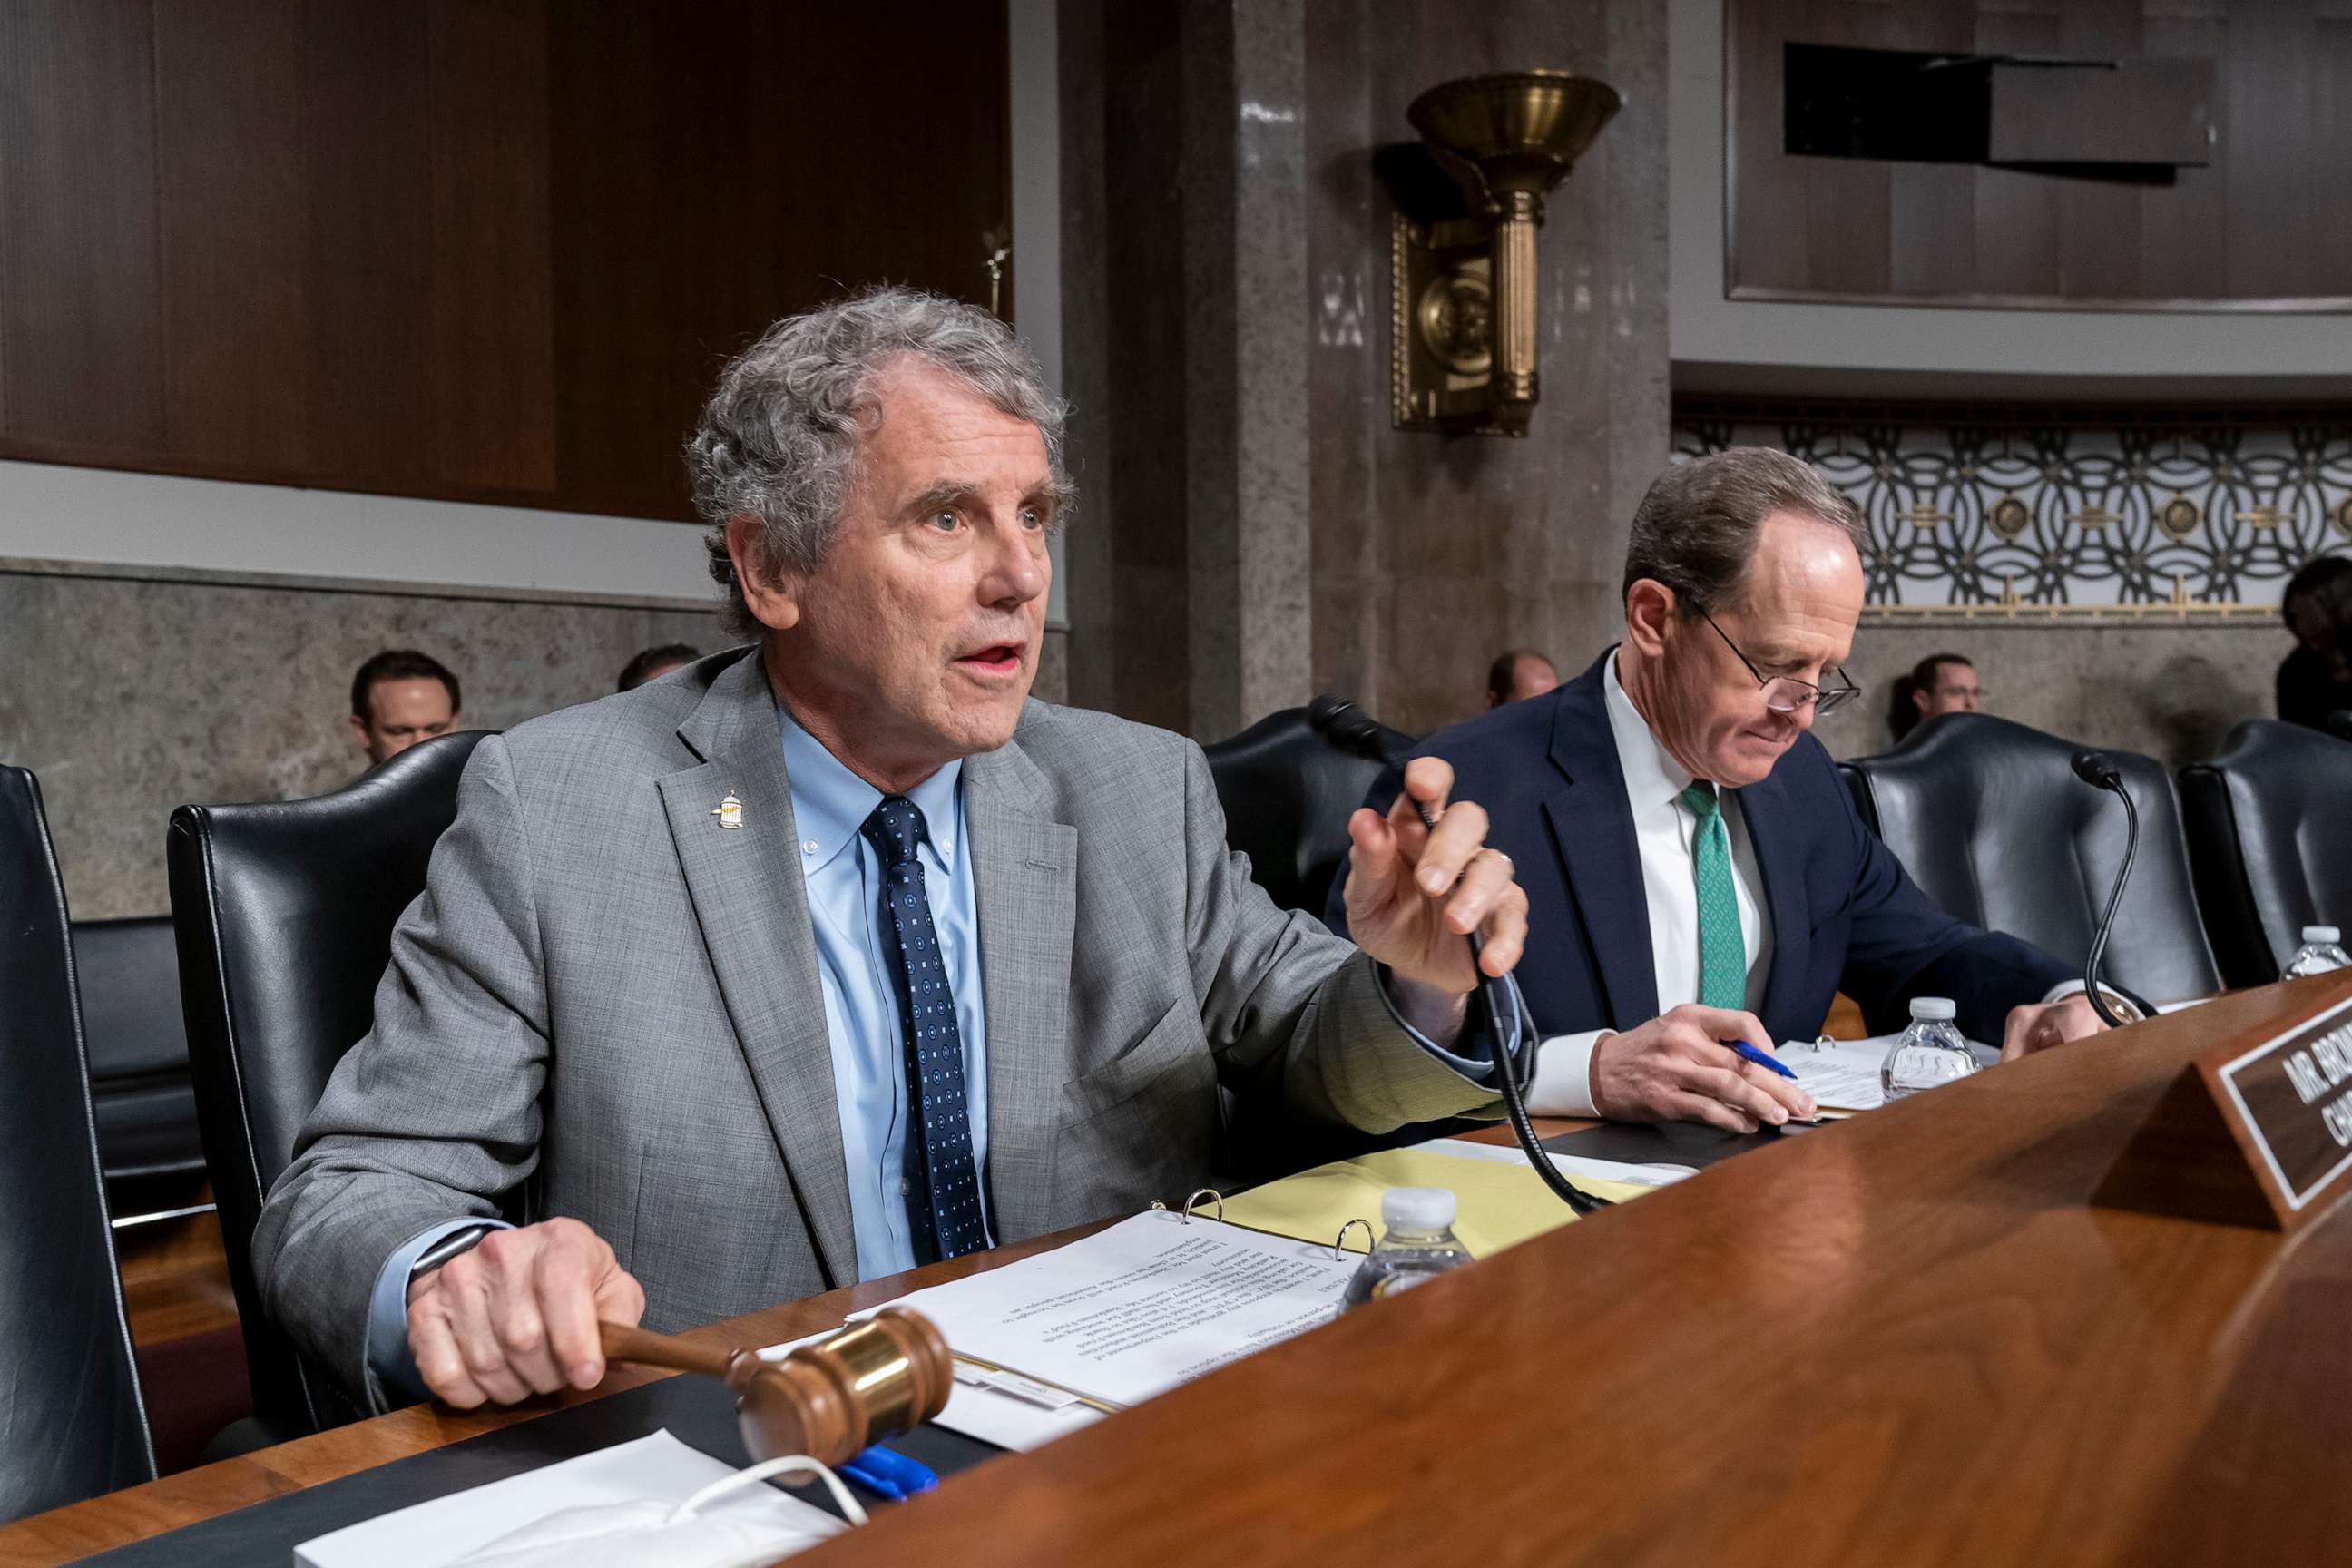 PHOTO: Sen. Sherrod Brown, chairman of the Senate Banking Committee, and Sen. Pat Toomey, lead a hearing on cryptocurrency and the collapse of the FTX crypto exhange and its founder Sam Bankman-Fried, at the Capitol in Washington, D.C., Dec. 14, 2022.